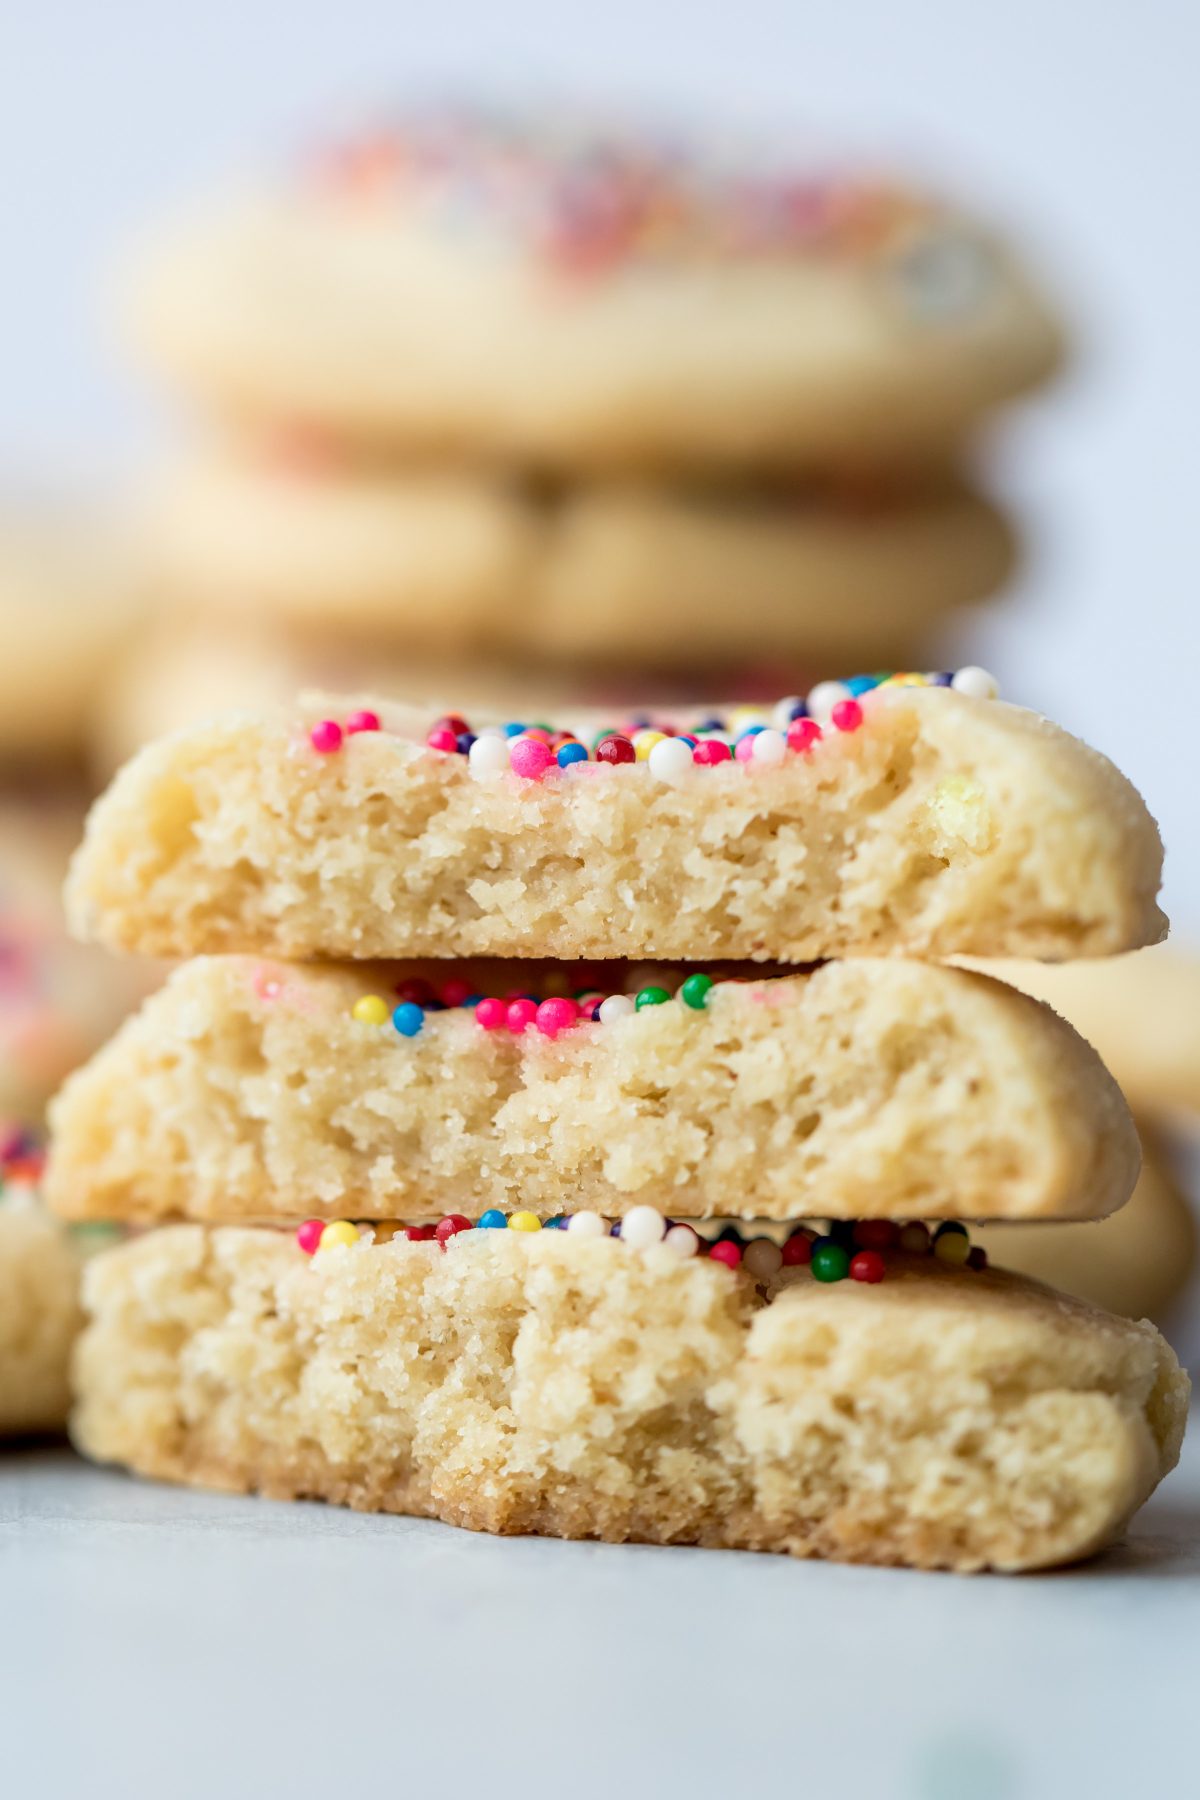 5D4A5722 - Sprinkled - Sally McKenney - Brown Butter Sugar Cookies - HIGH RES